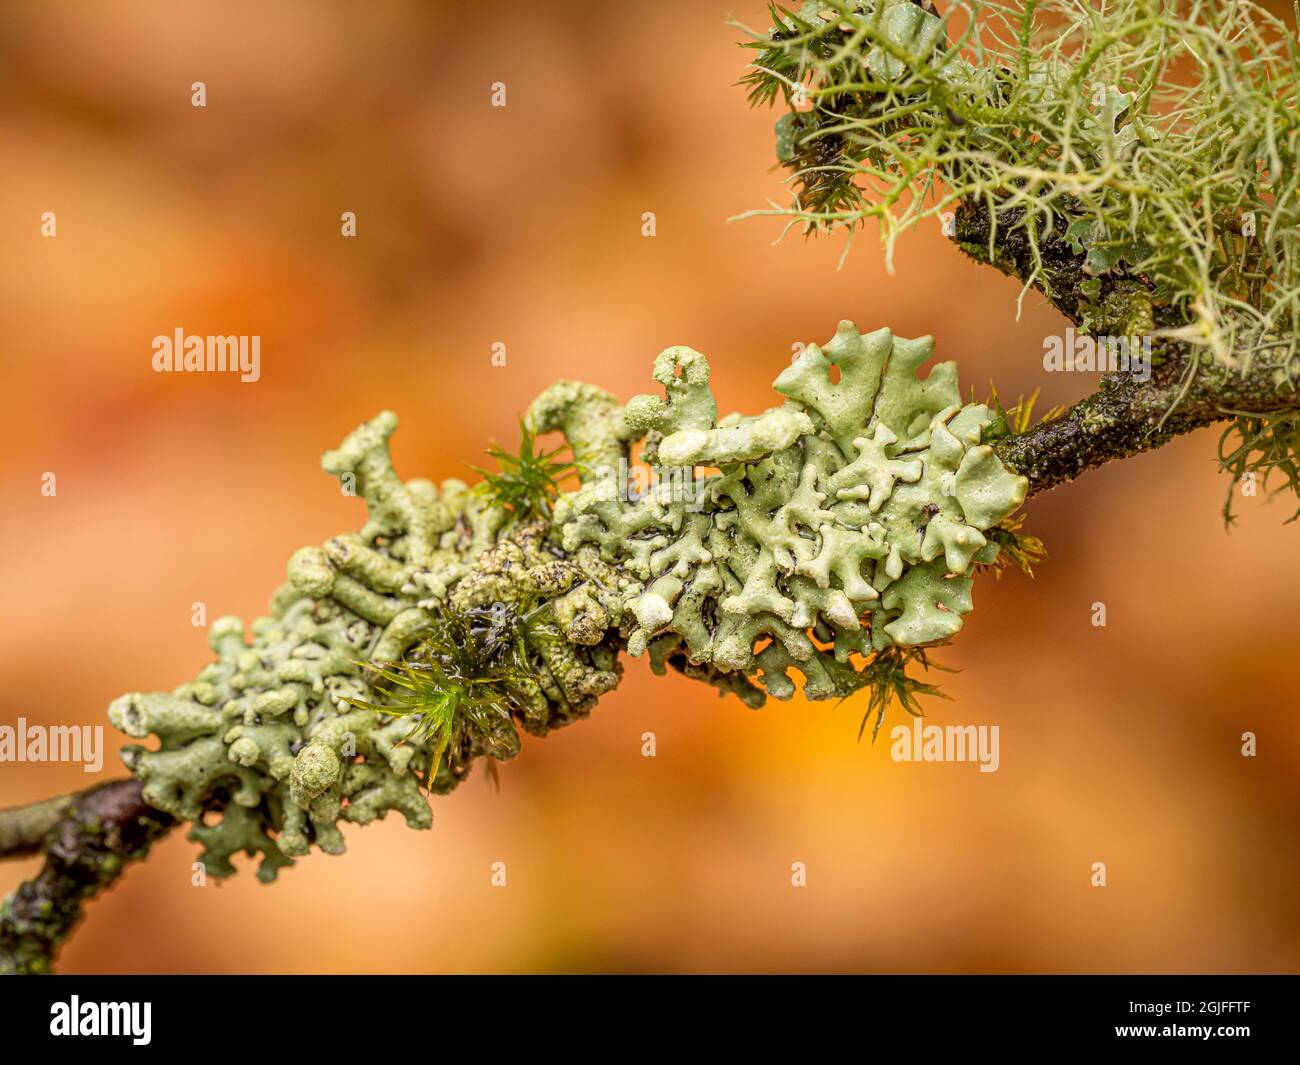 Foliose lichen on branch with moss, fruticose lichen at top right, rainy fall day makes lichens swell and expose their color, Seattle, Washington Stock Photo